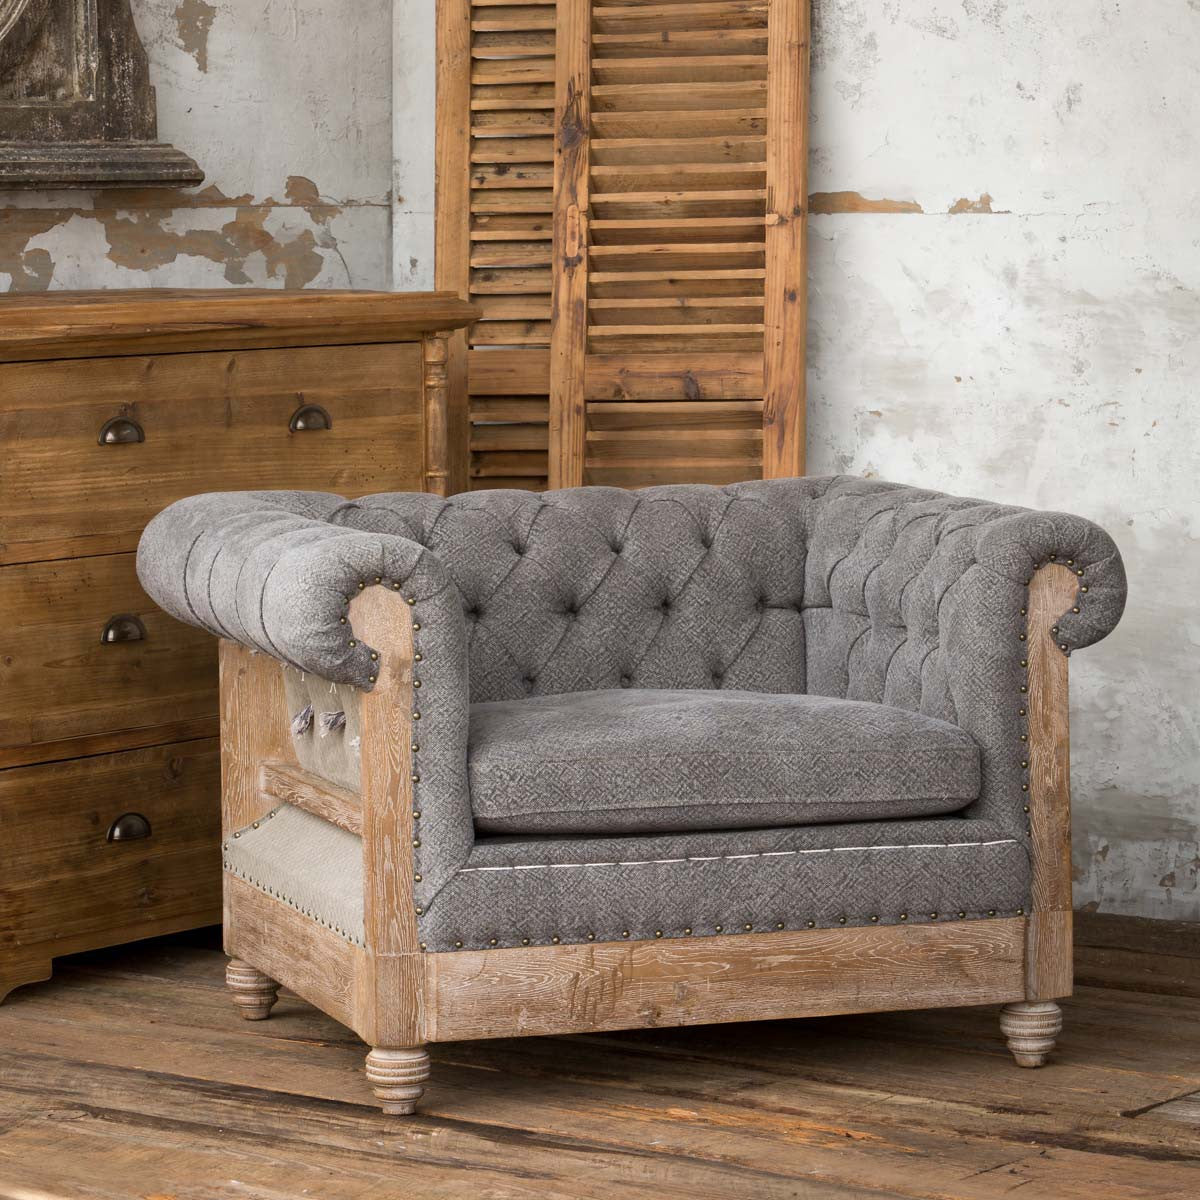 tufted-grey-chair